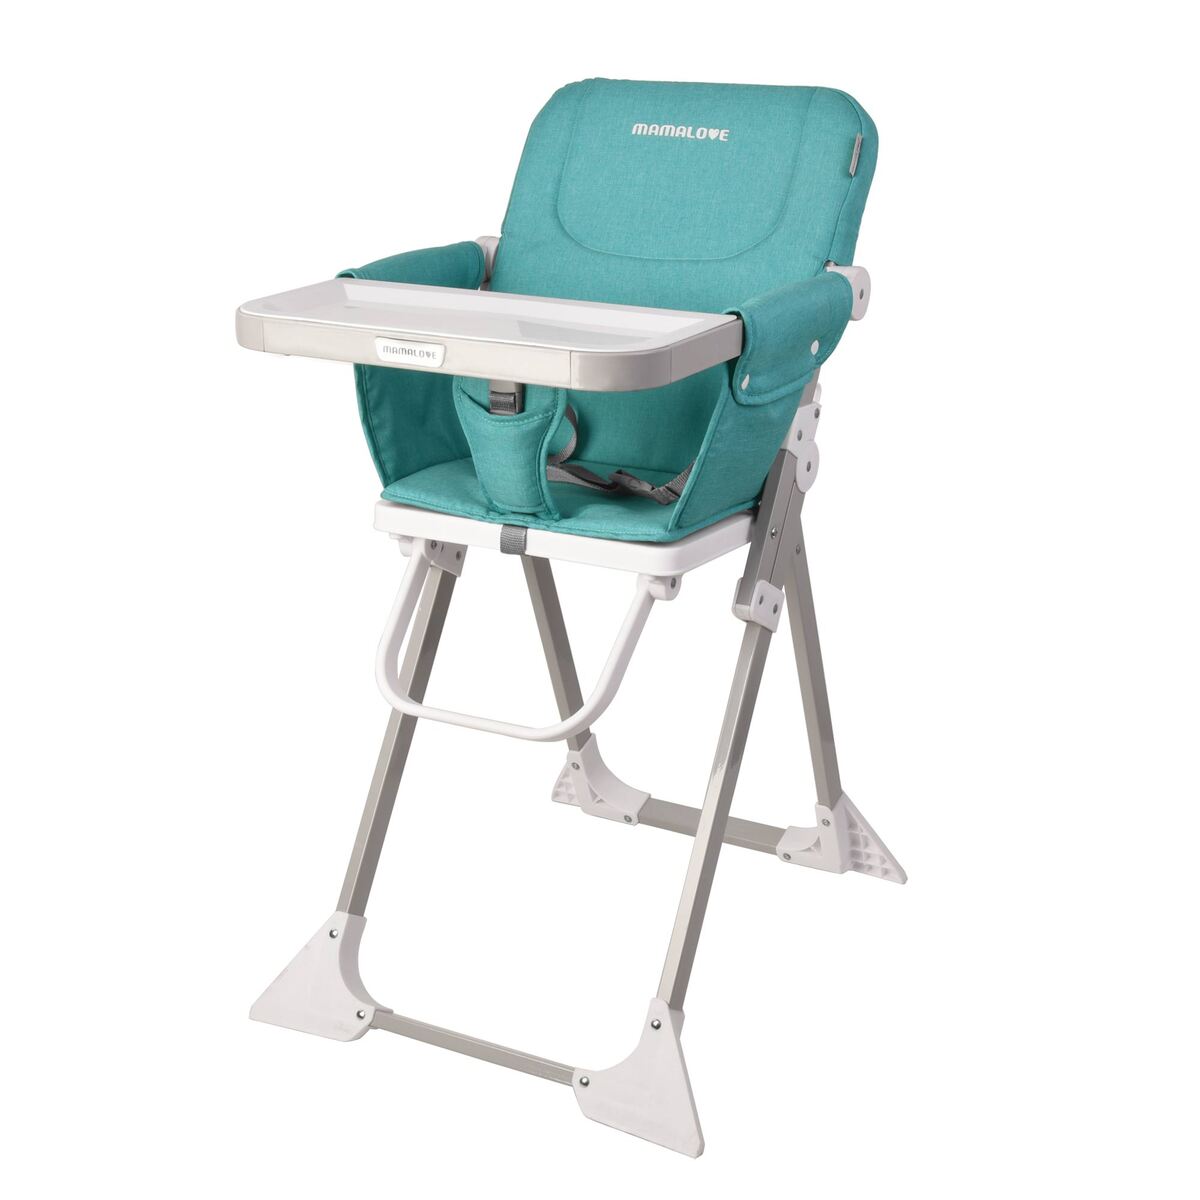 Khoory Baby High Chair SG-101 Assorted